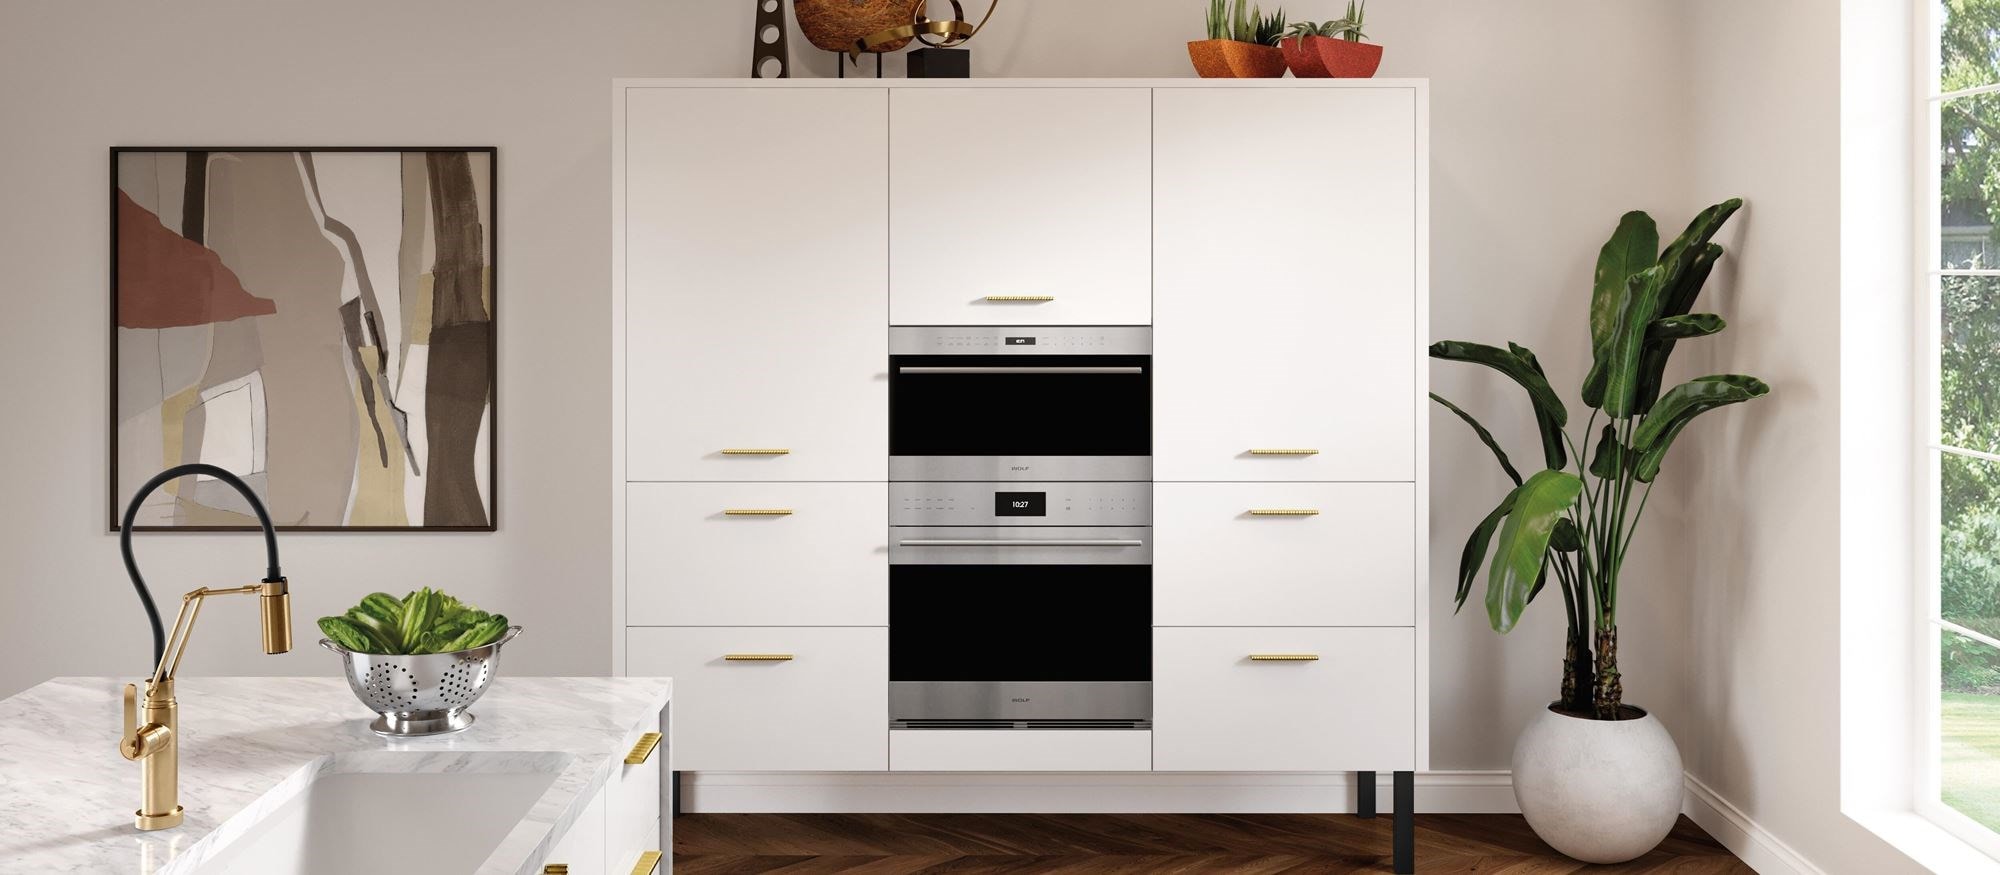 Wolf Built-In Microwaves available in drawer, drop-down door and side-swing microwave models blending beautifully into your kitchen design